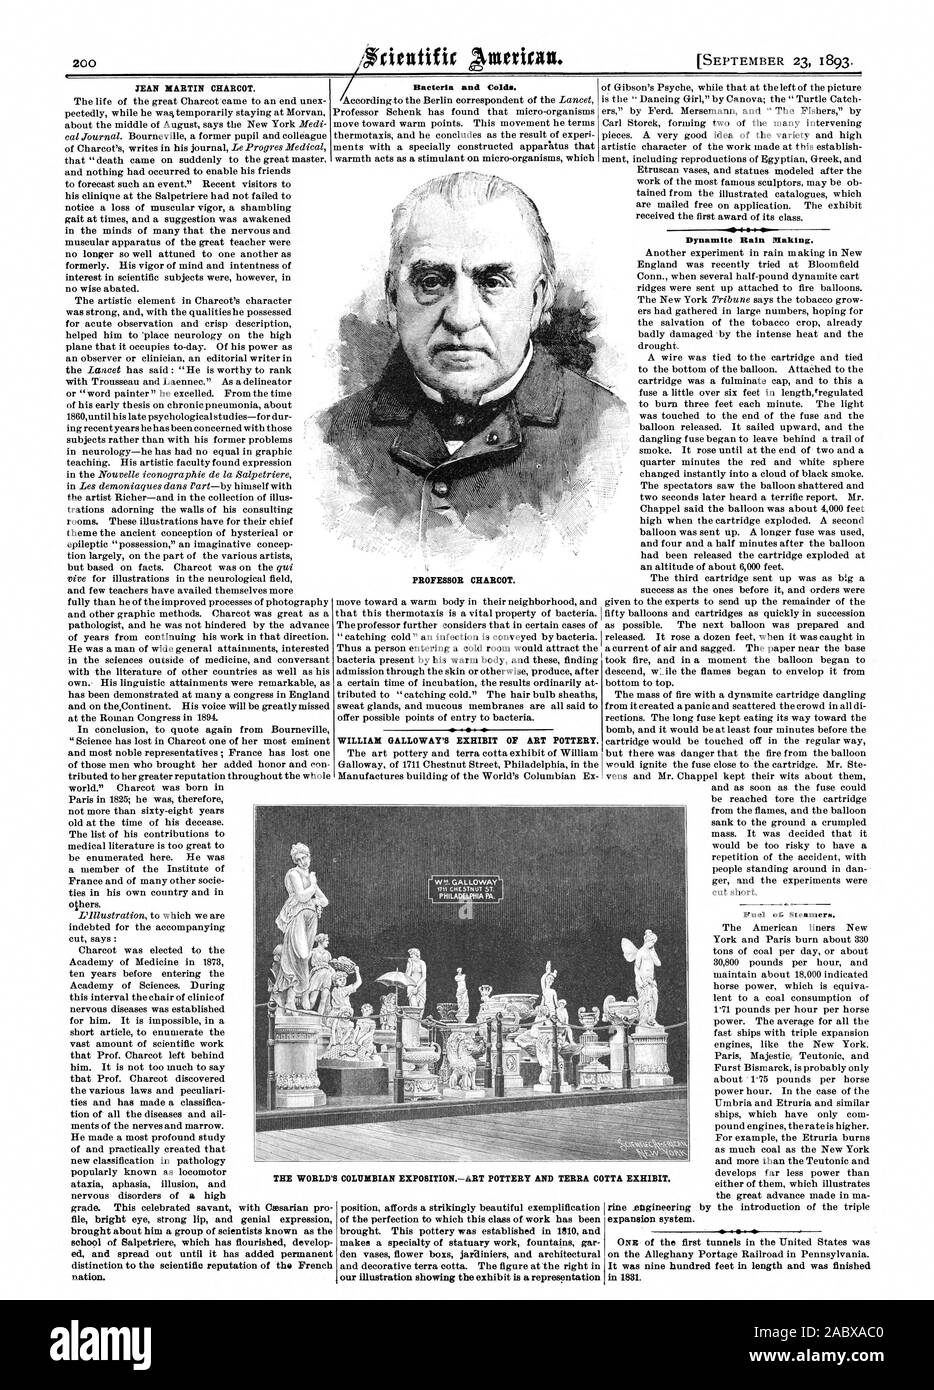 JEAN MARTIN CHARCOT. nation. Bacteria and Colds. WILLIAM GALLOWAY'S EXHIBIT OF ART POTTERY. Dynamite Rain Making. PROFESSOR CHARCOT. PHILADELPHIA PA. THE WORLD'S COLUMBIAN EXPOSITIONART POTTERY AND TERRA COTTA EXHIBIT. Fuel of. Steamers., scientific american, 1893-09-23 Stock Photo